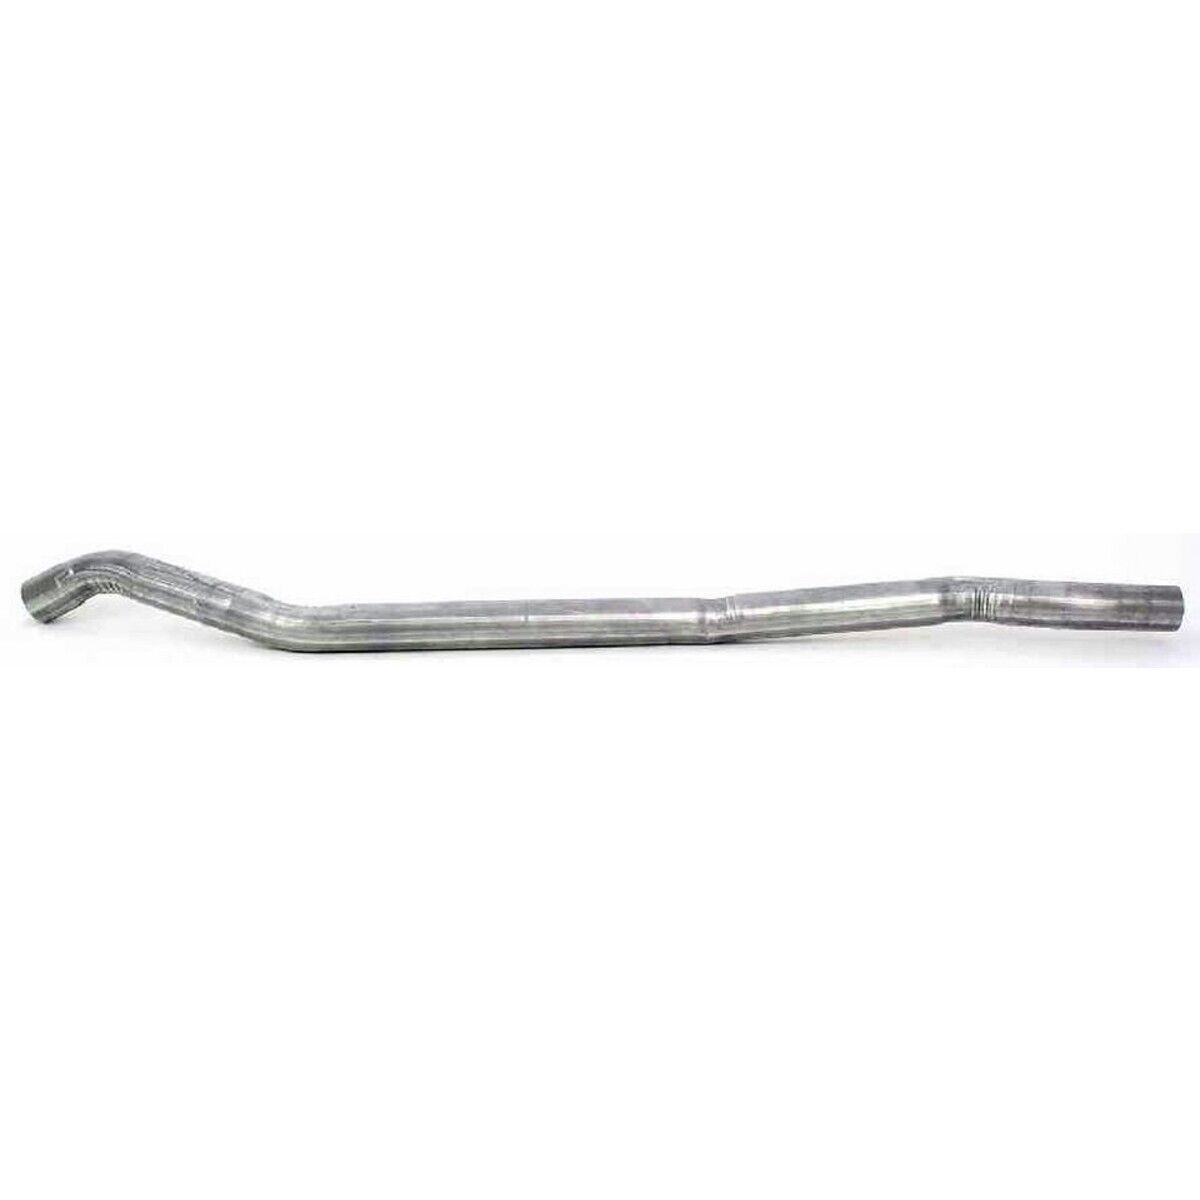 55356 Walker Exhaust Pipe for Town and Country Dodge Grand Caravan Chrysler